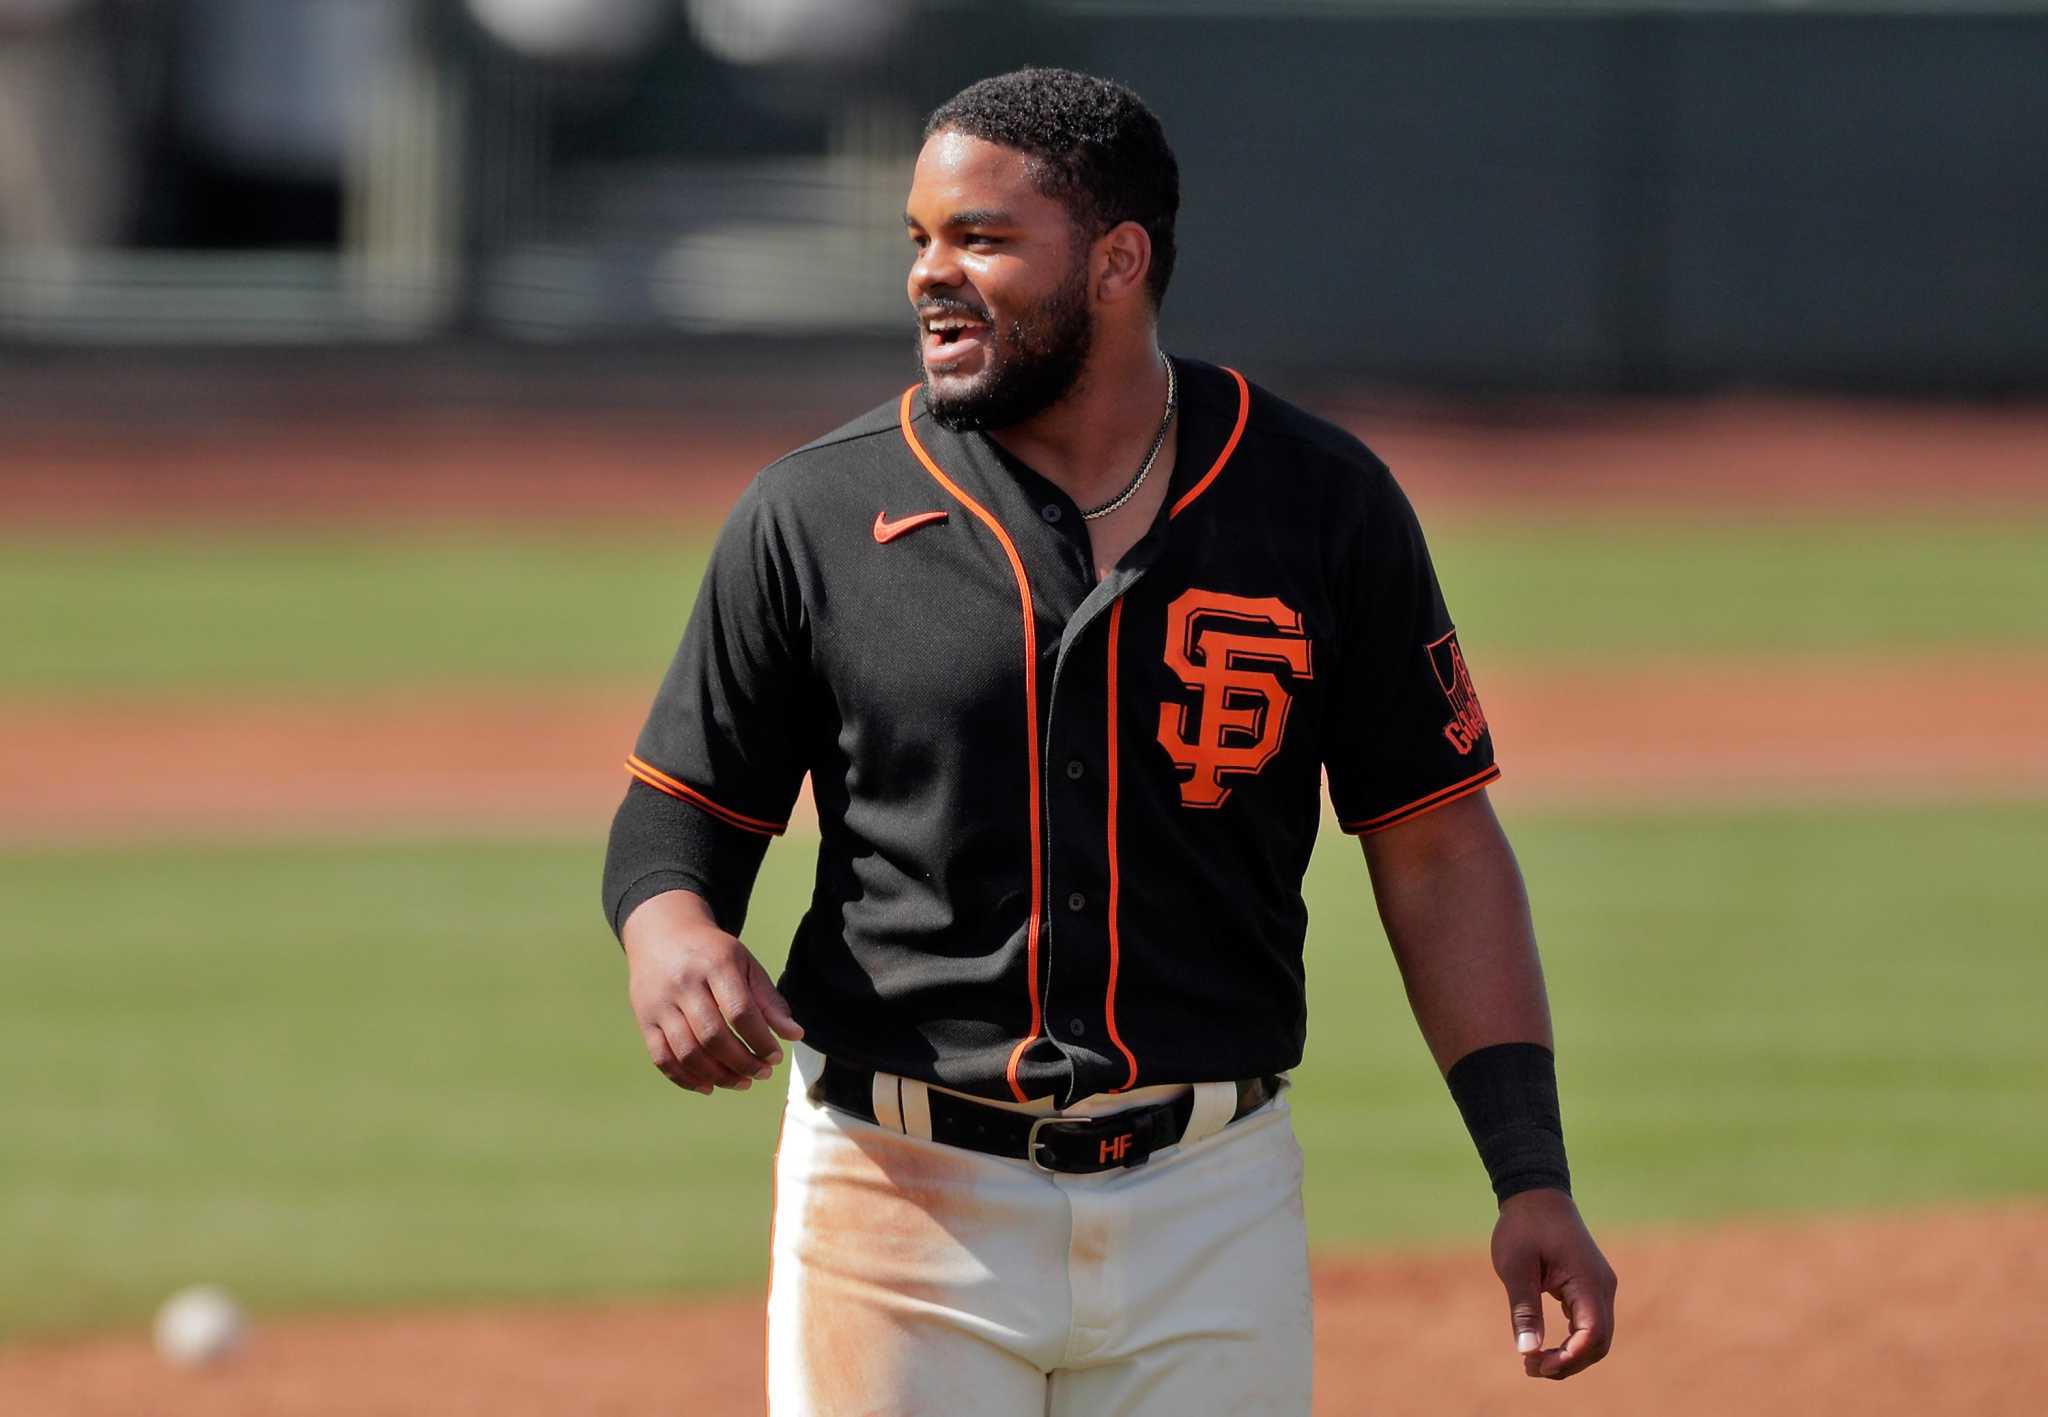 Giants to call up top outfield prospect Heliot Ramos